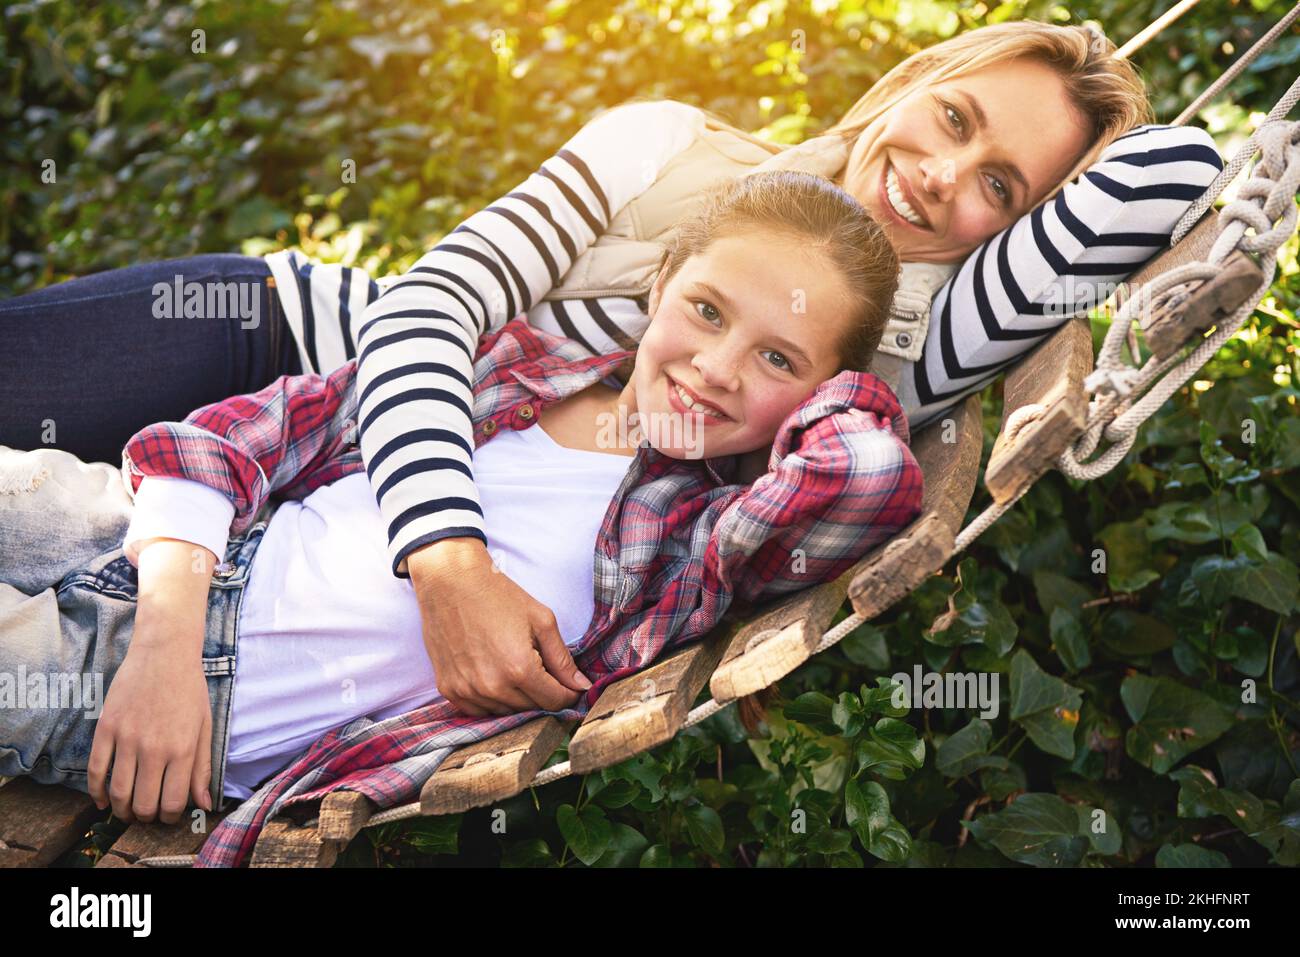 Our time together is priceless. A mother and daughter lying on a hammock together in the garden. Stock Photo